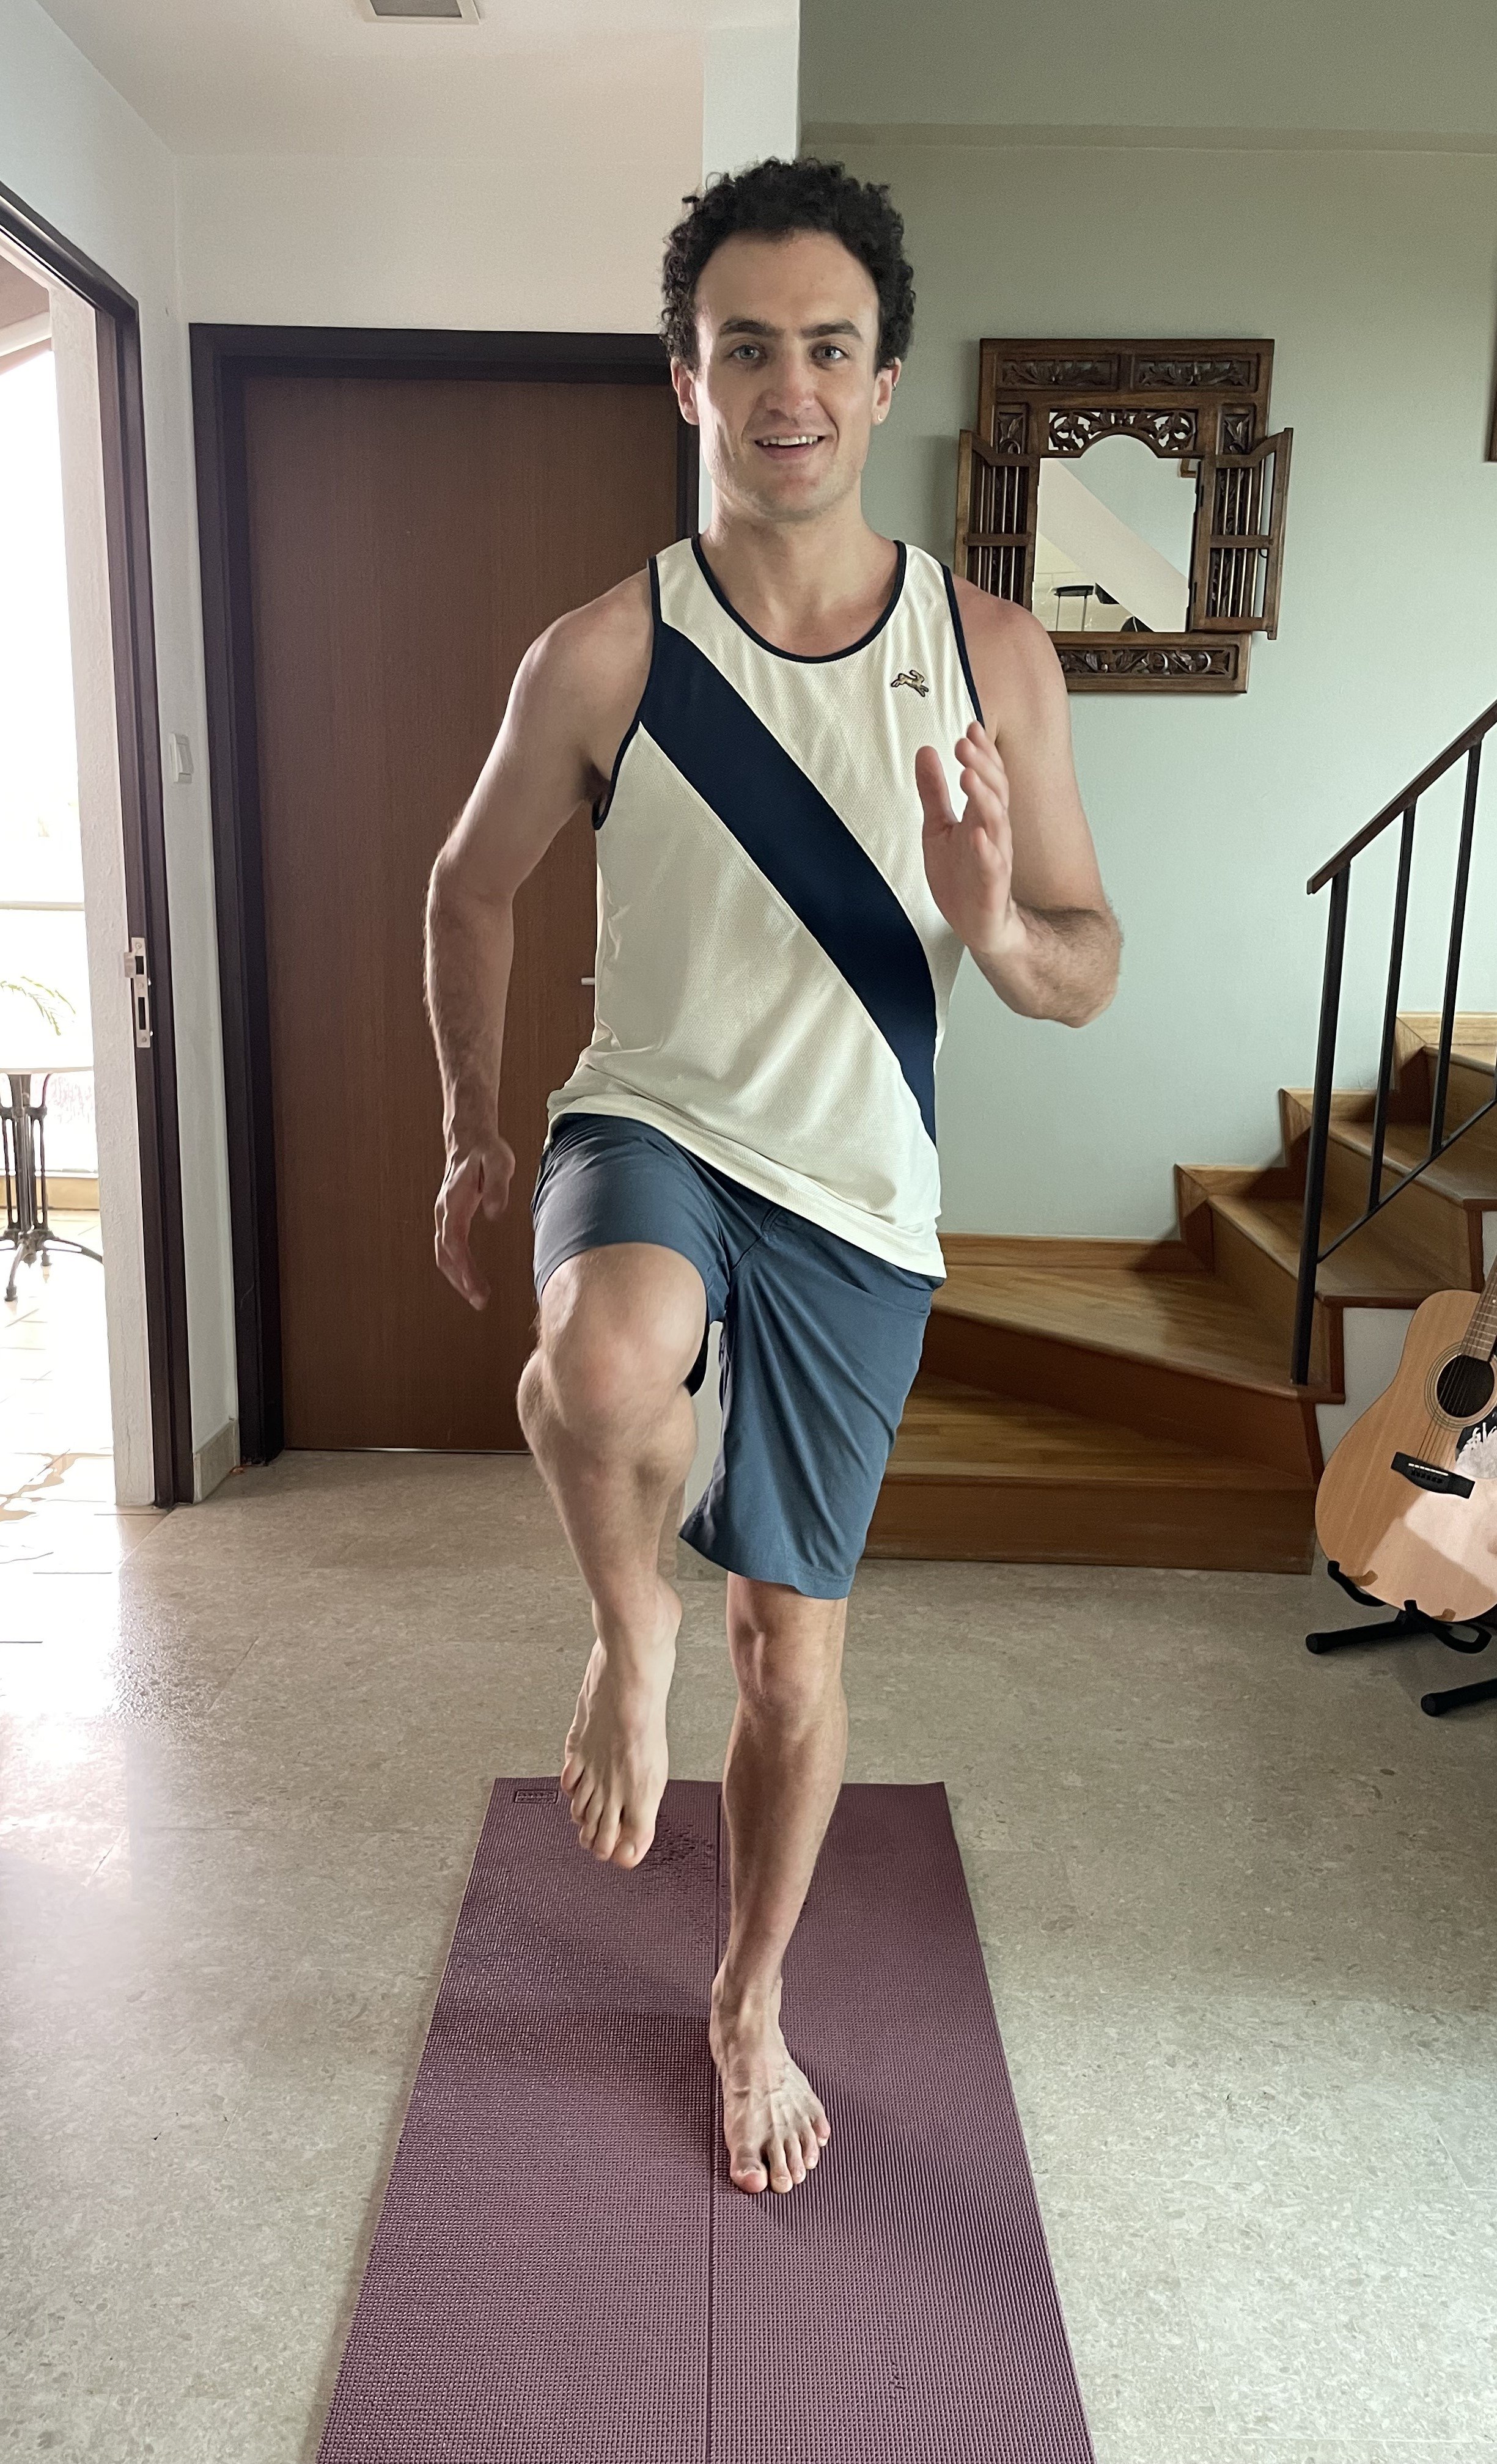 Exercise of the Month: Balance on the Mat